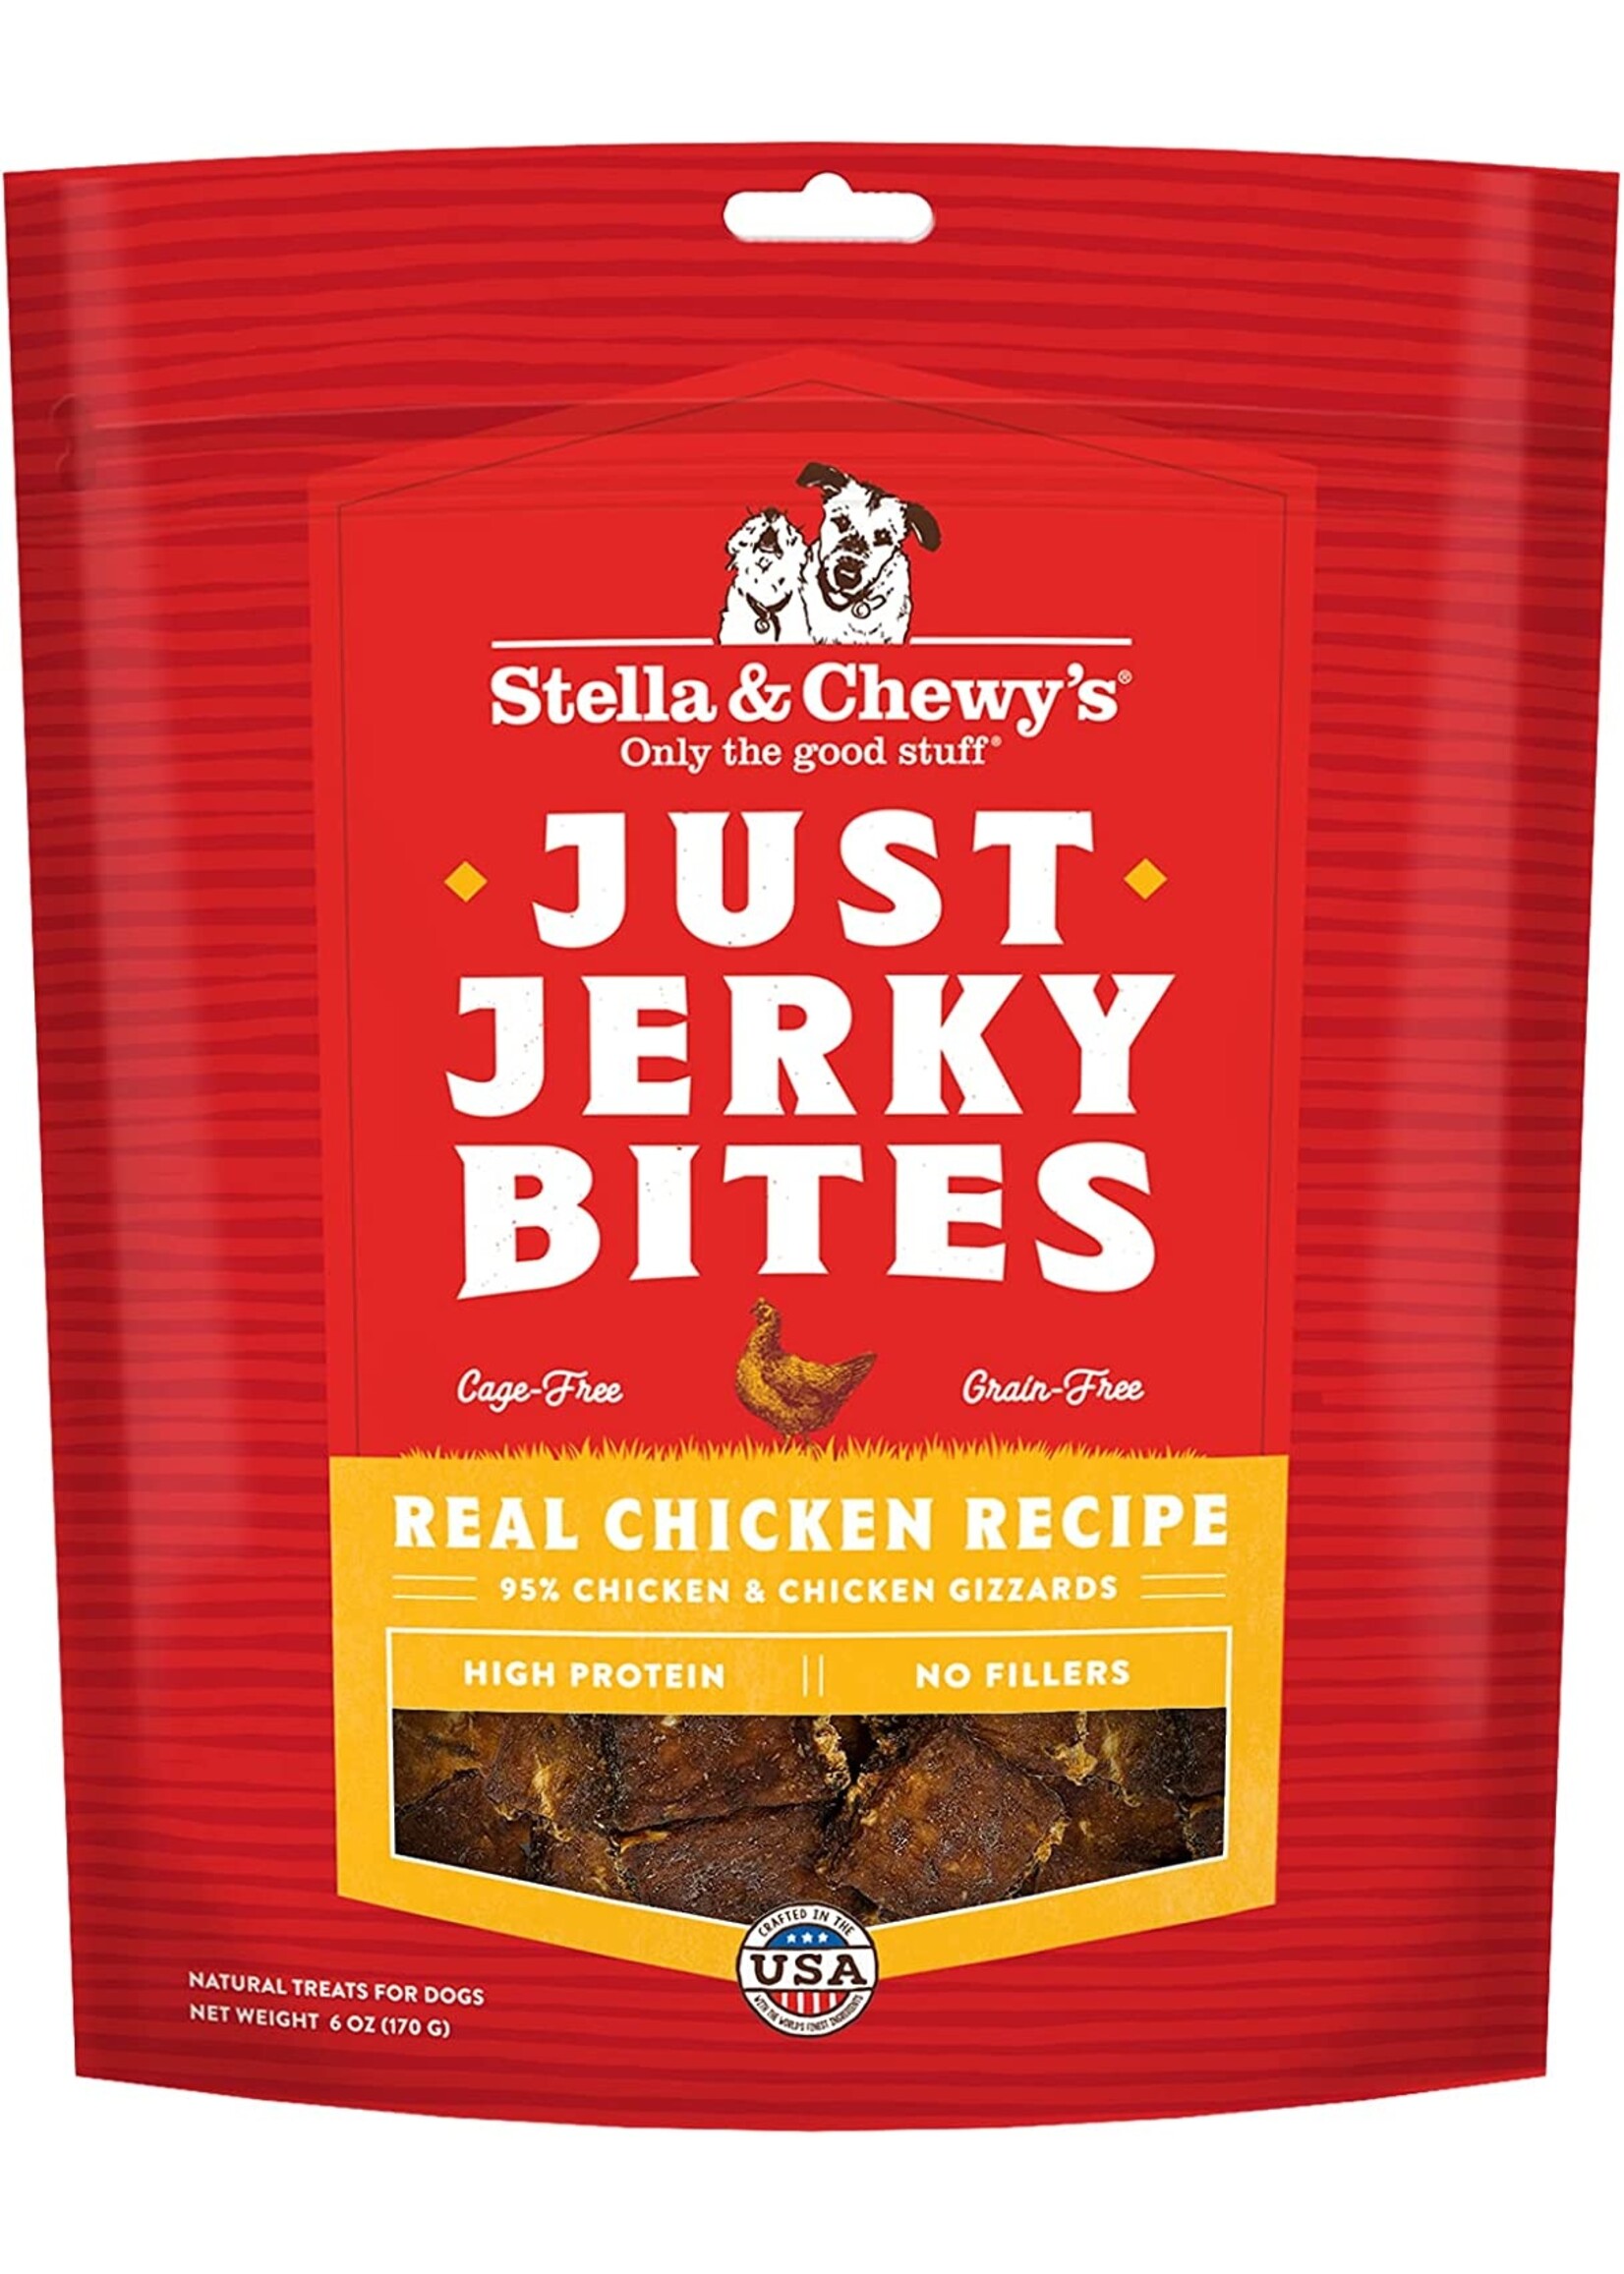 Stella and Chewy's Stella & Chewy's Just Jerky Bites Chicken 6oz